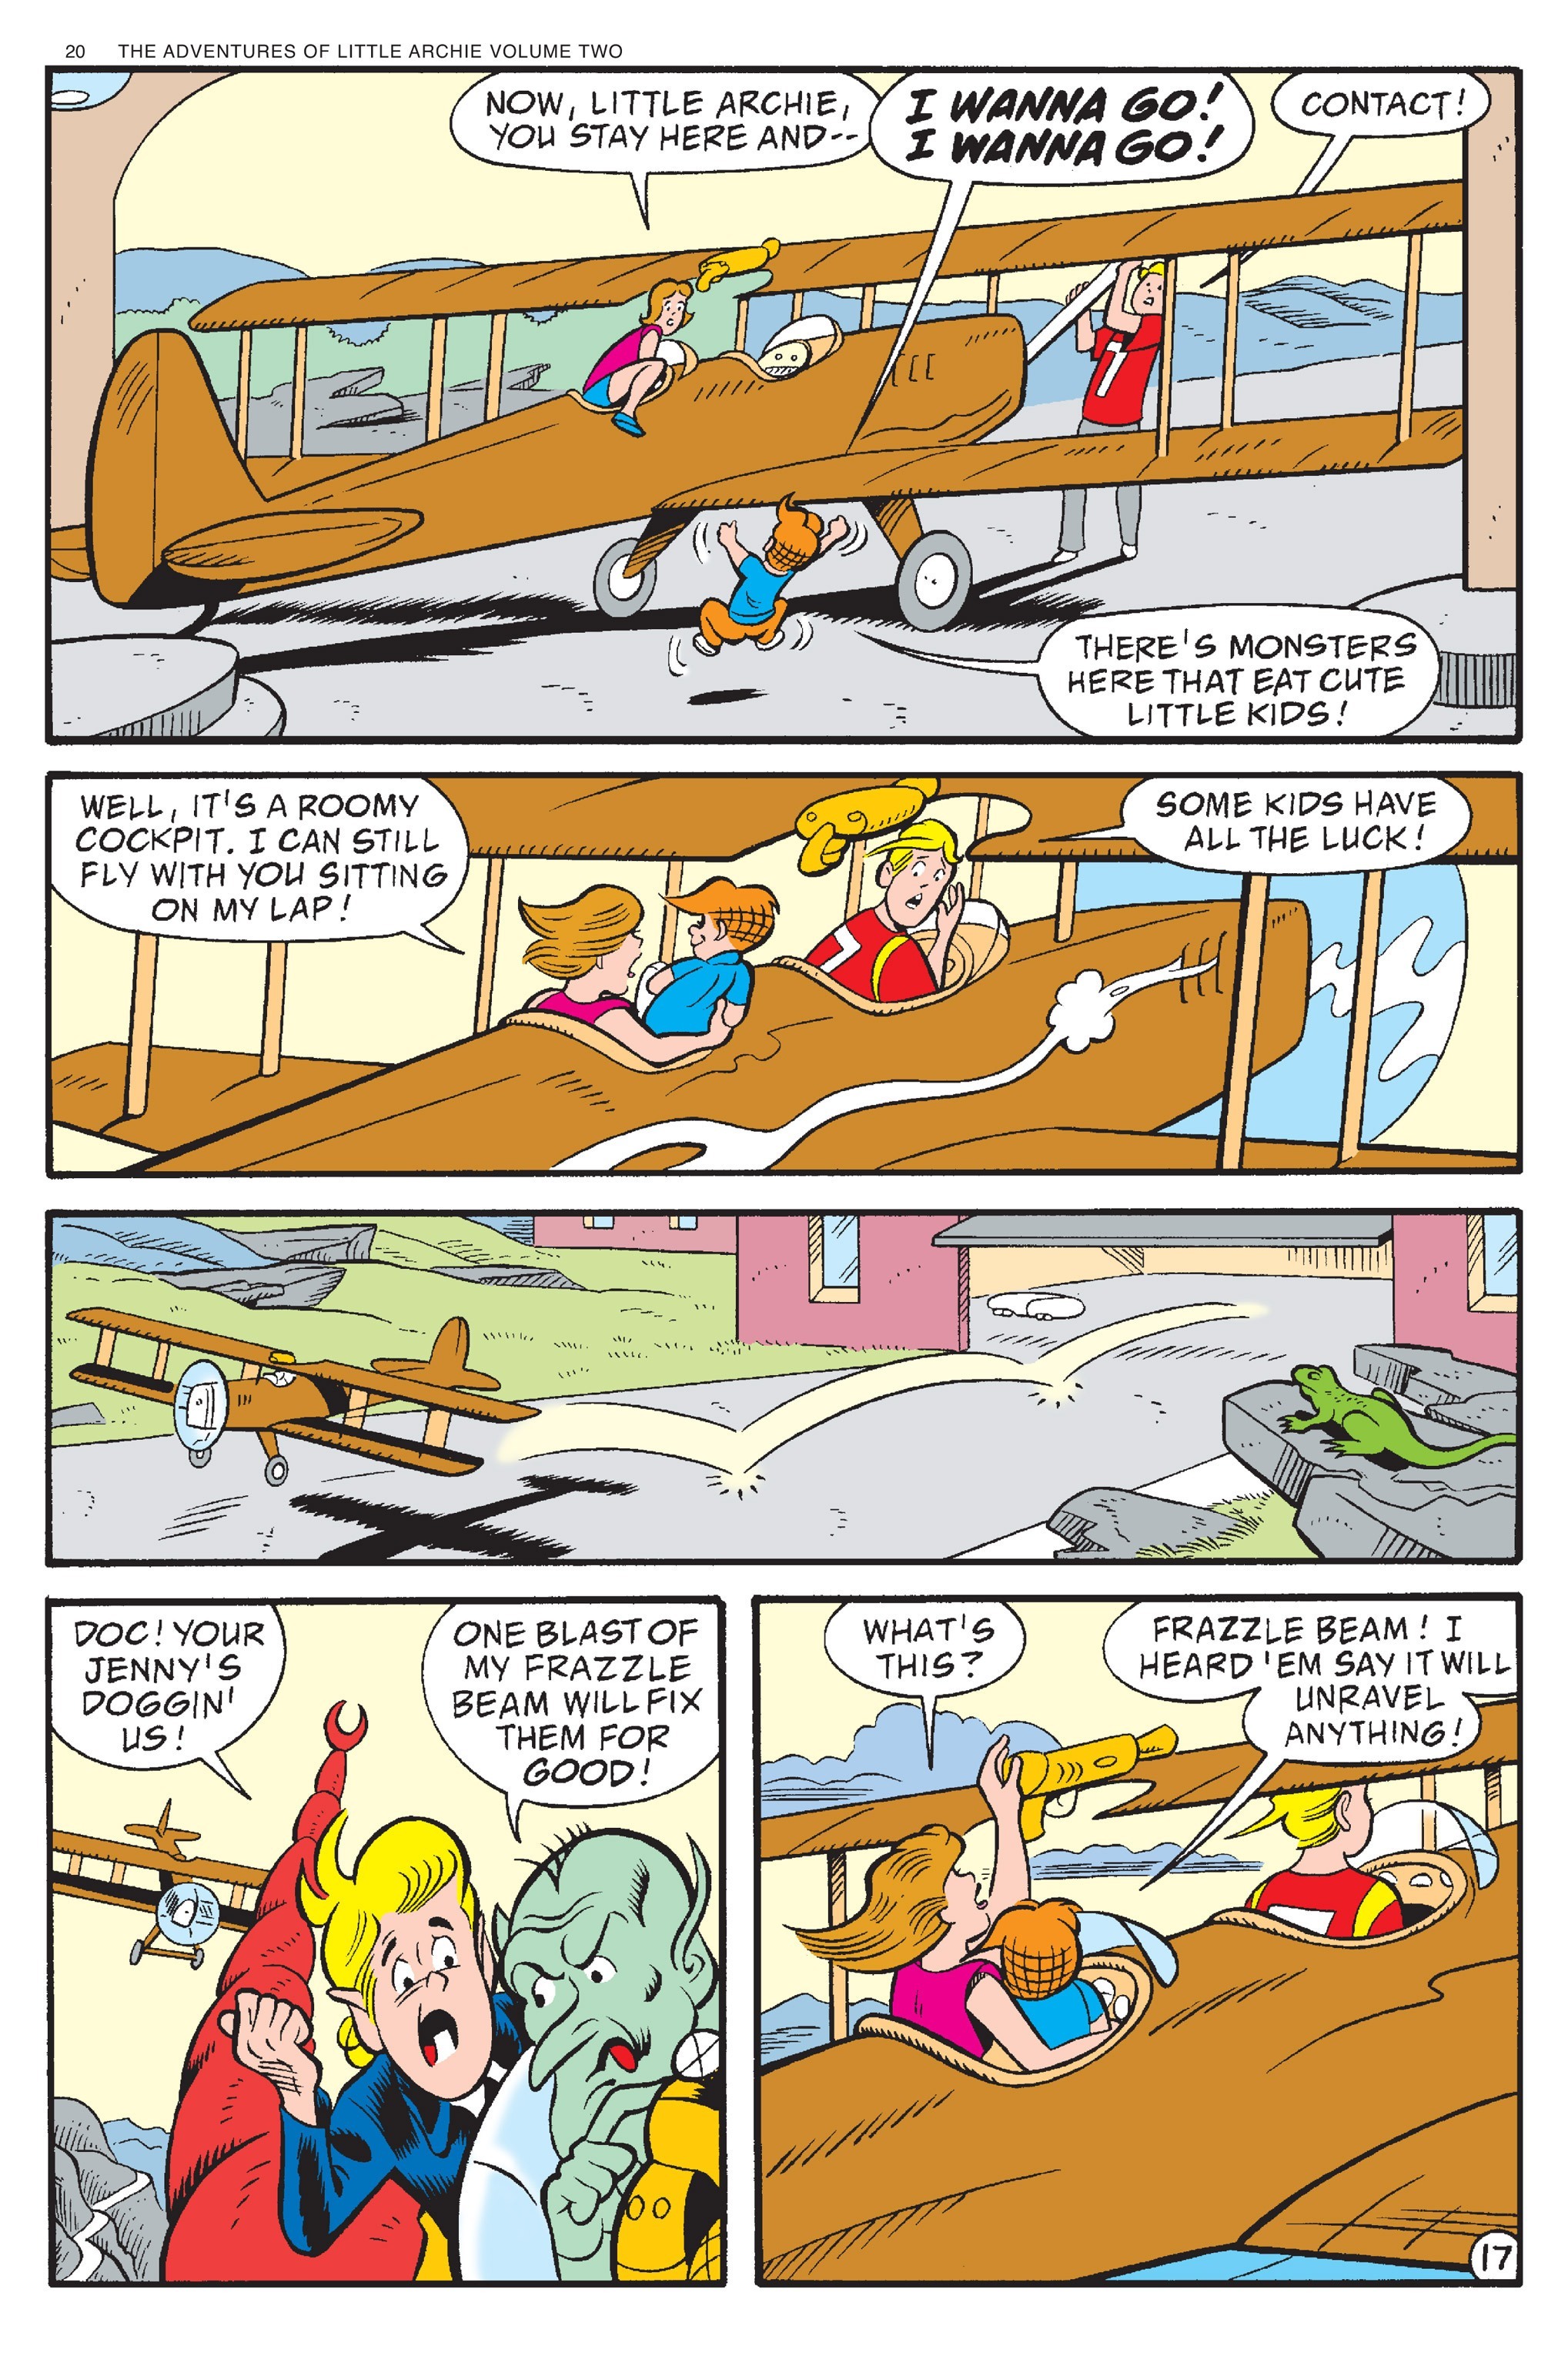 Read online Adventures of Little Archie comic -  Issue # TPB 2 - 21